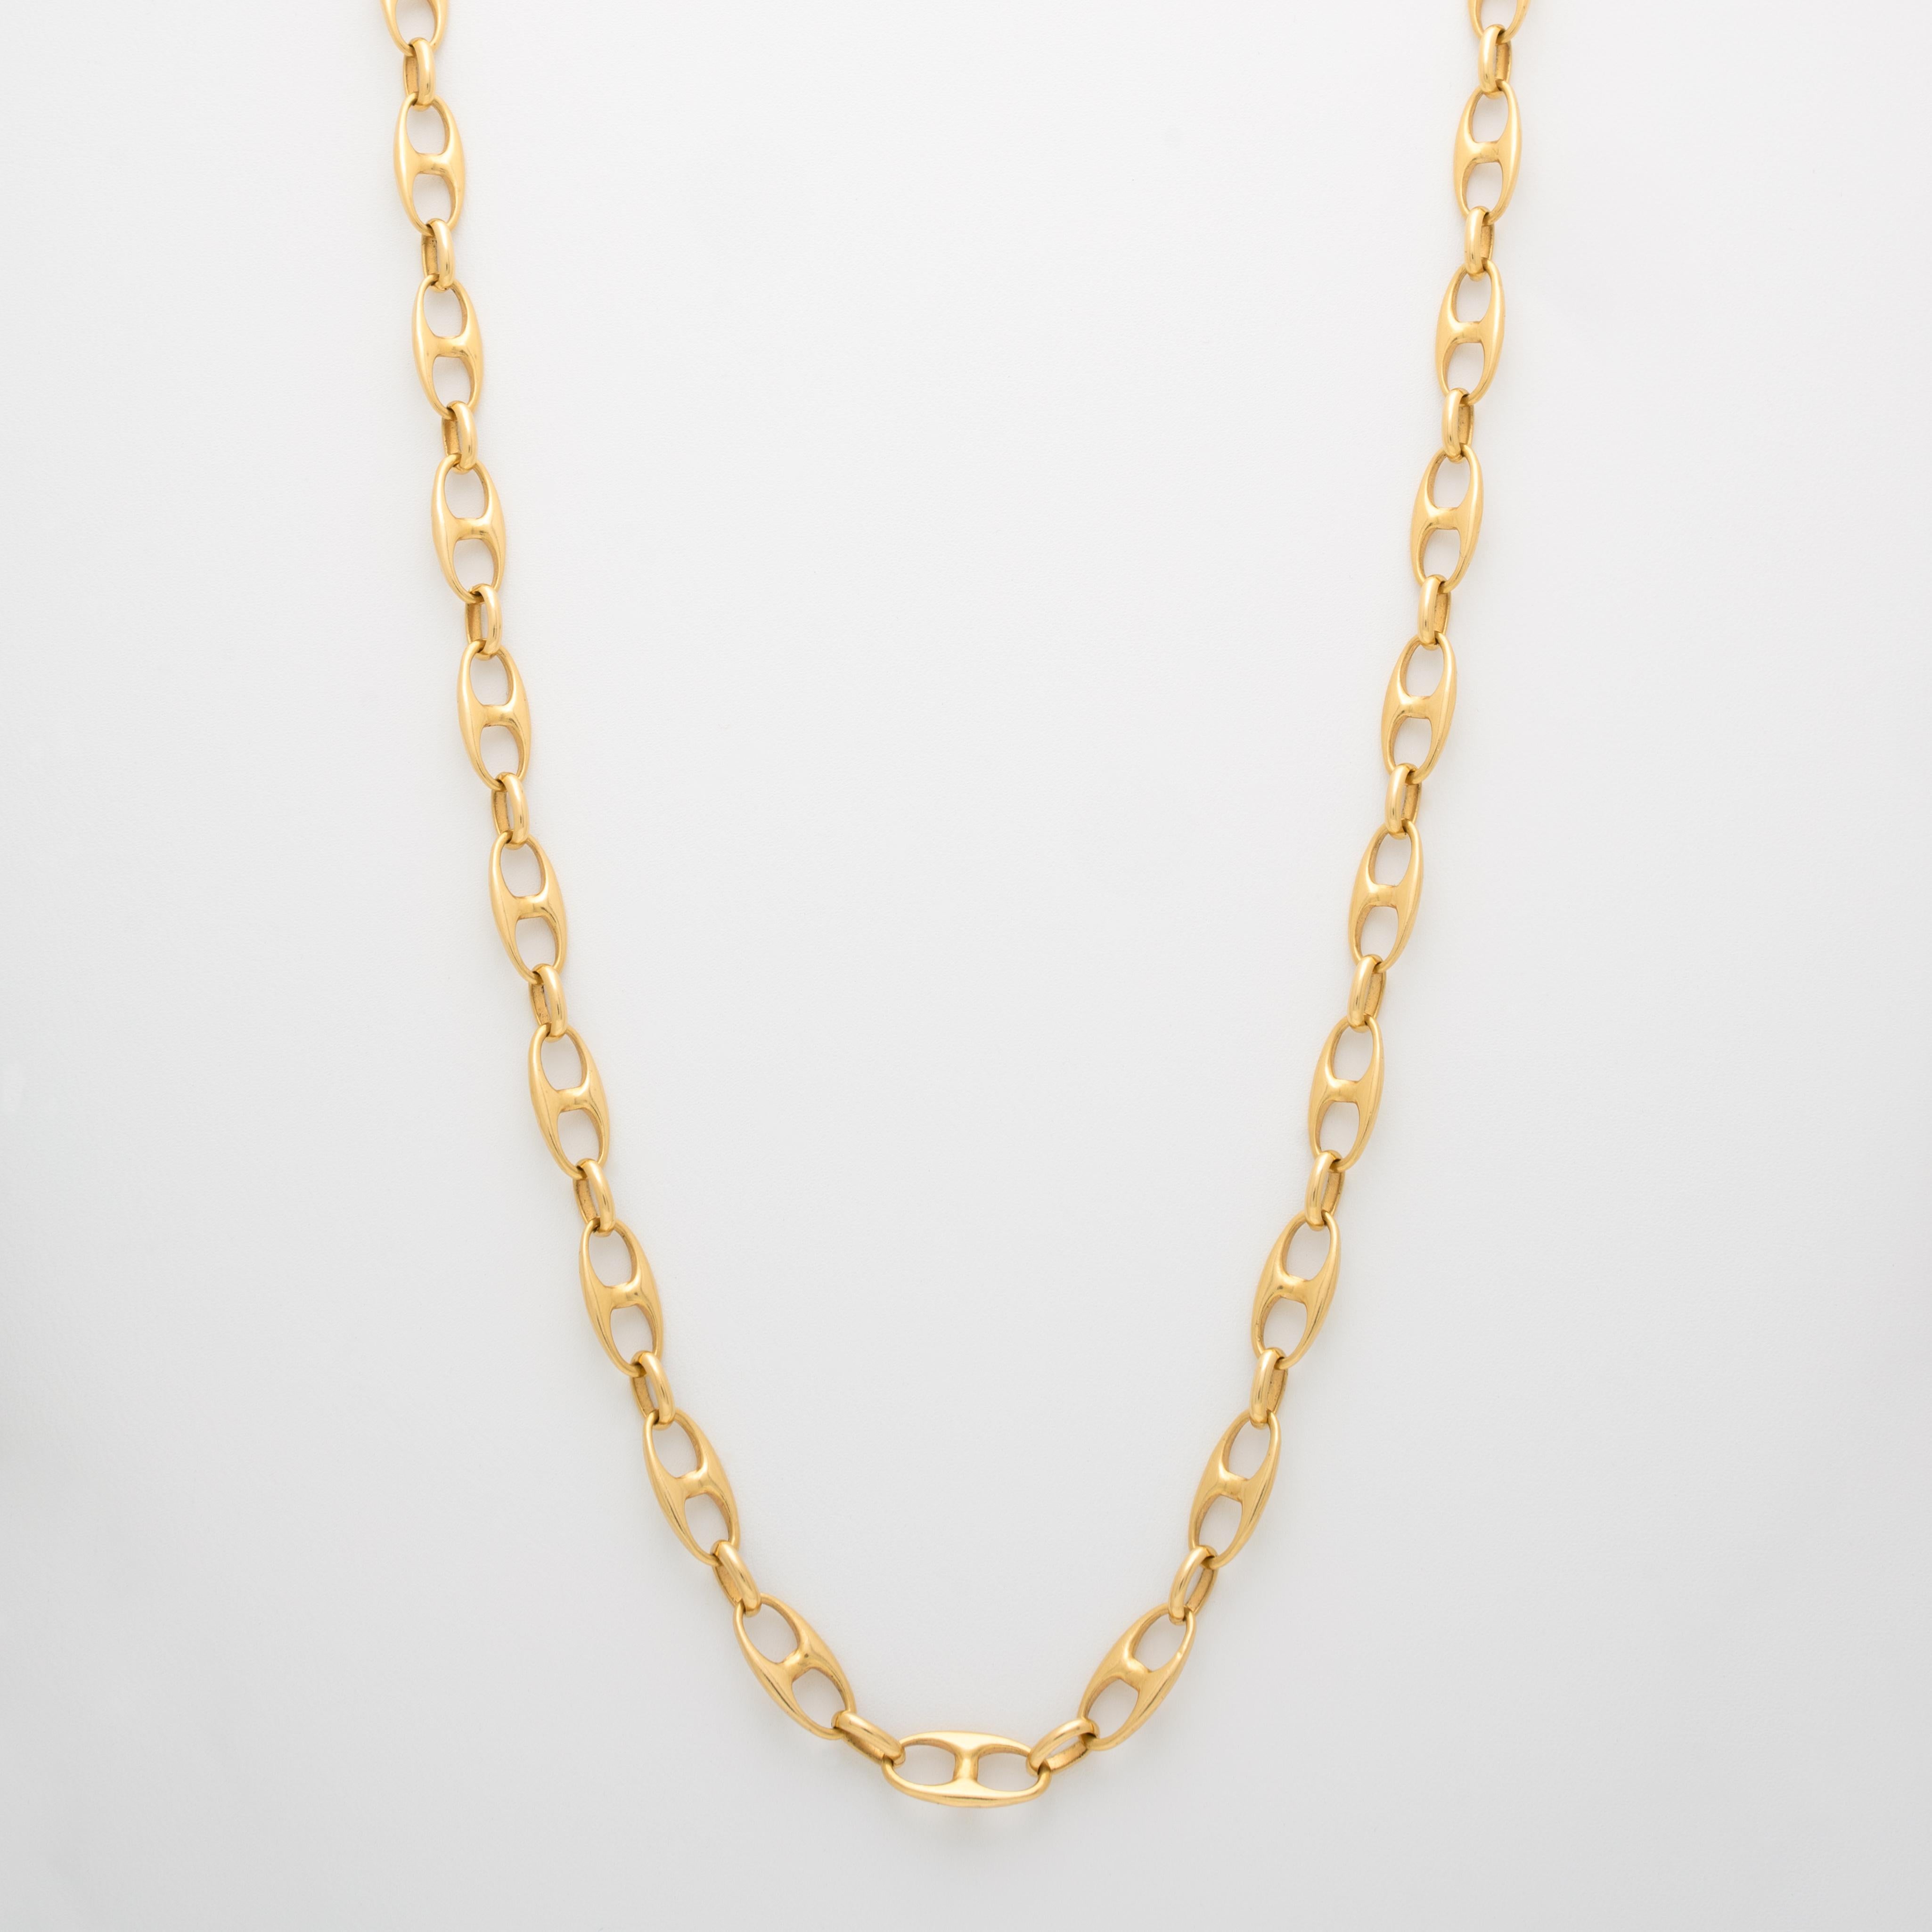 Vintage 18 Karat Yellow Gold Marine Link Chain c.1970s

Period: Vintage
Year: c.1970s
Material: 18k Yellow Gold 
Weight: 32.9g
Length: 31.5 inches
Width: 3.54mm
Condition: Very Good Vintage Condition

Image on is for the longer of 2 chains in